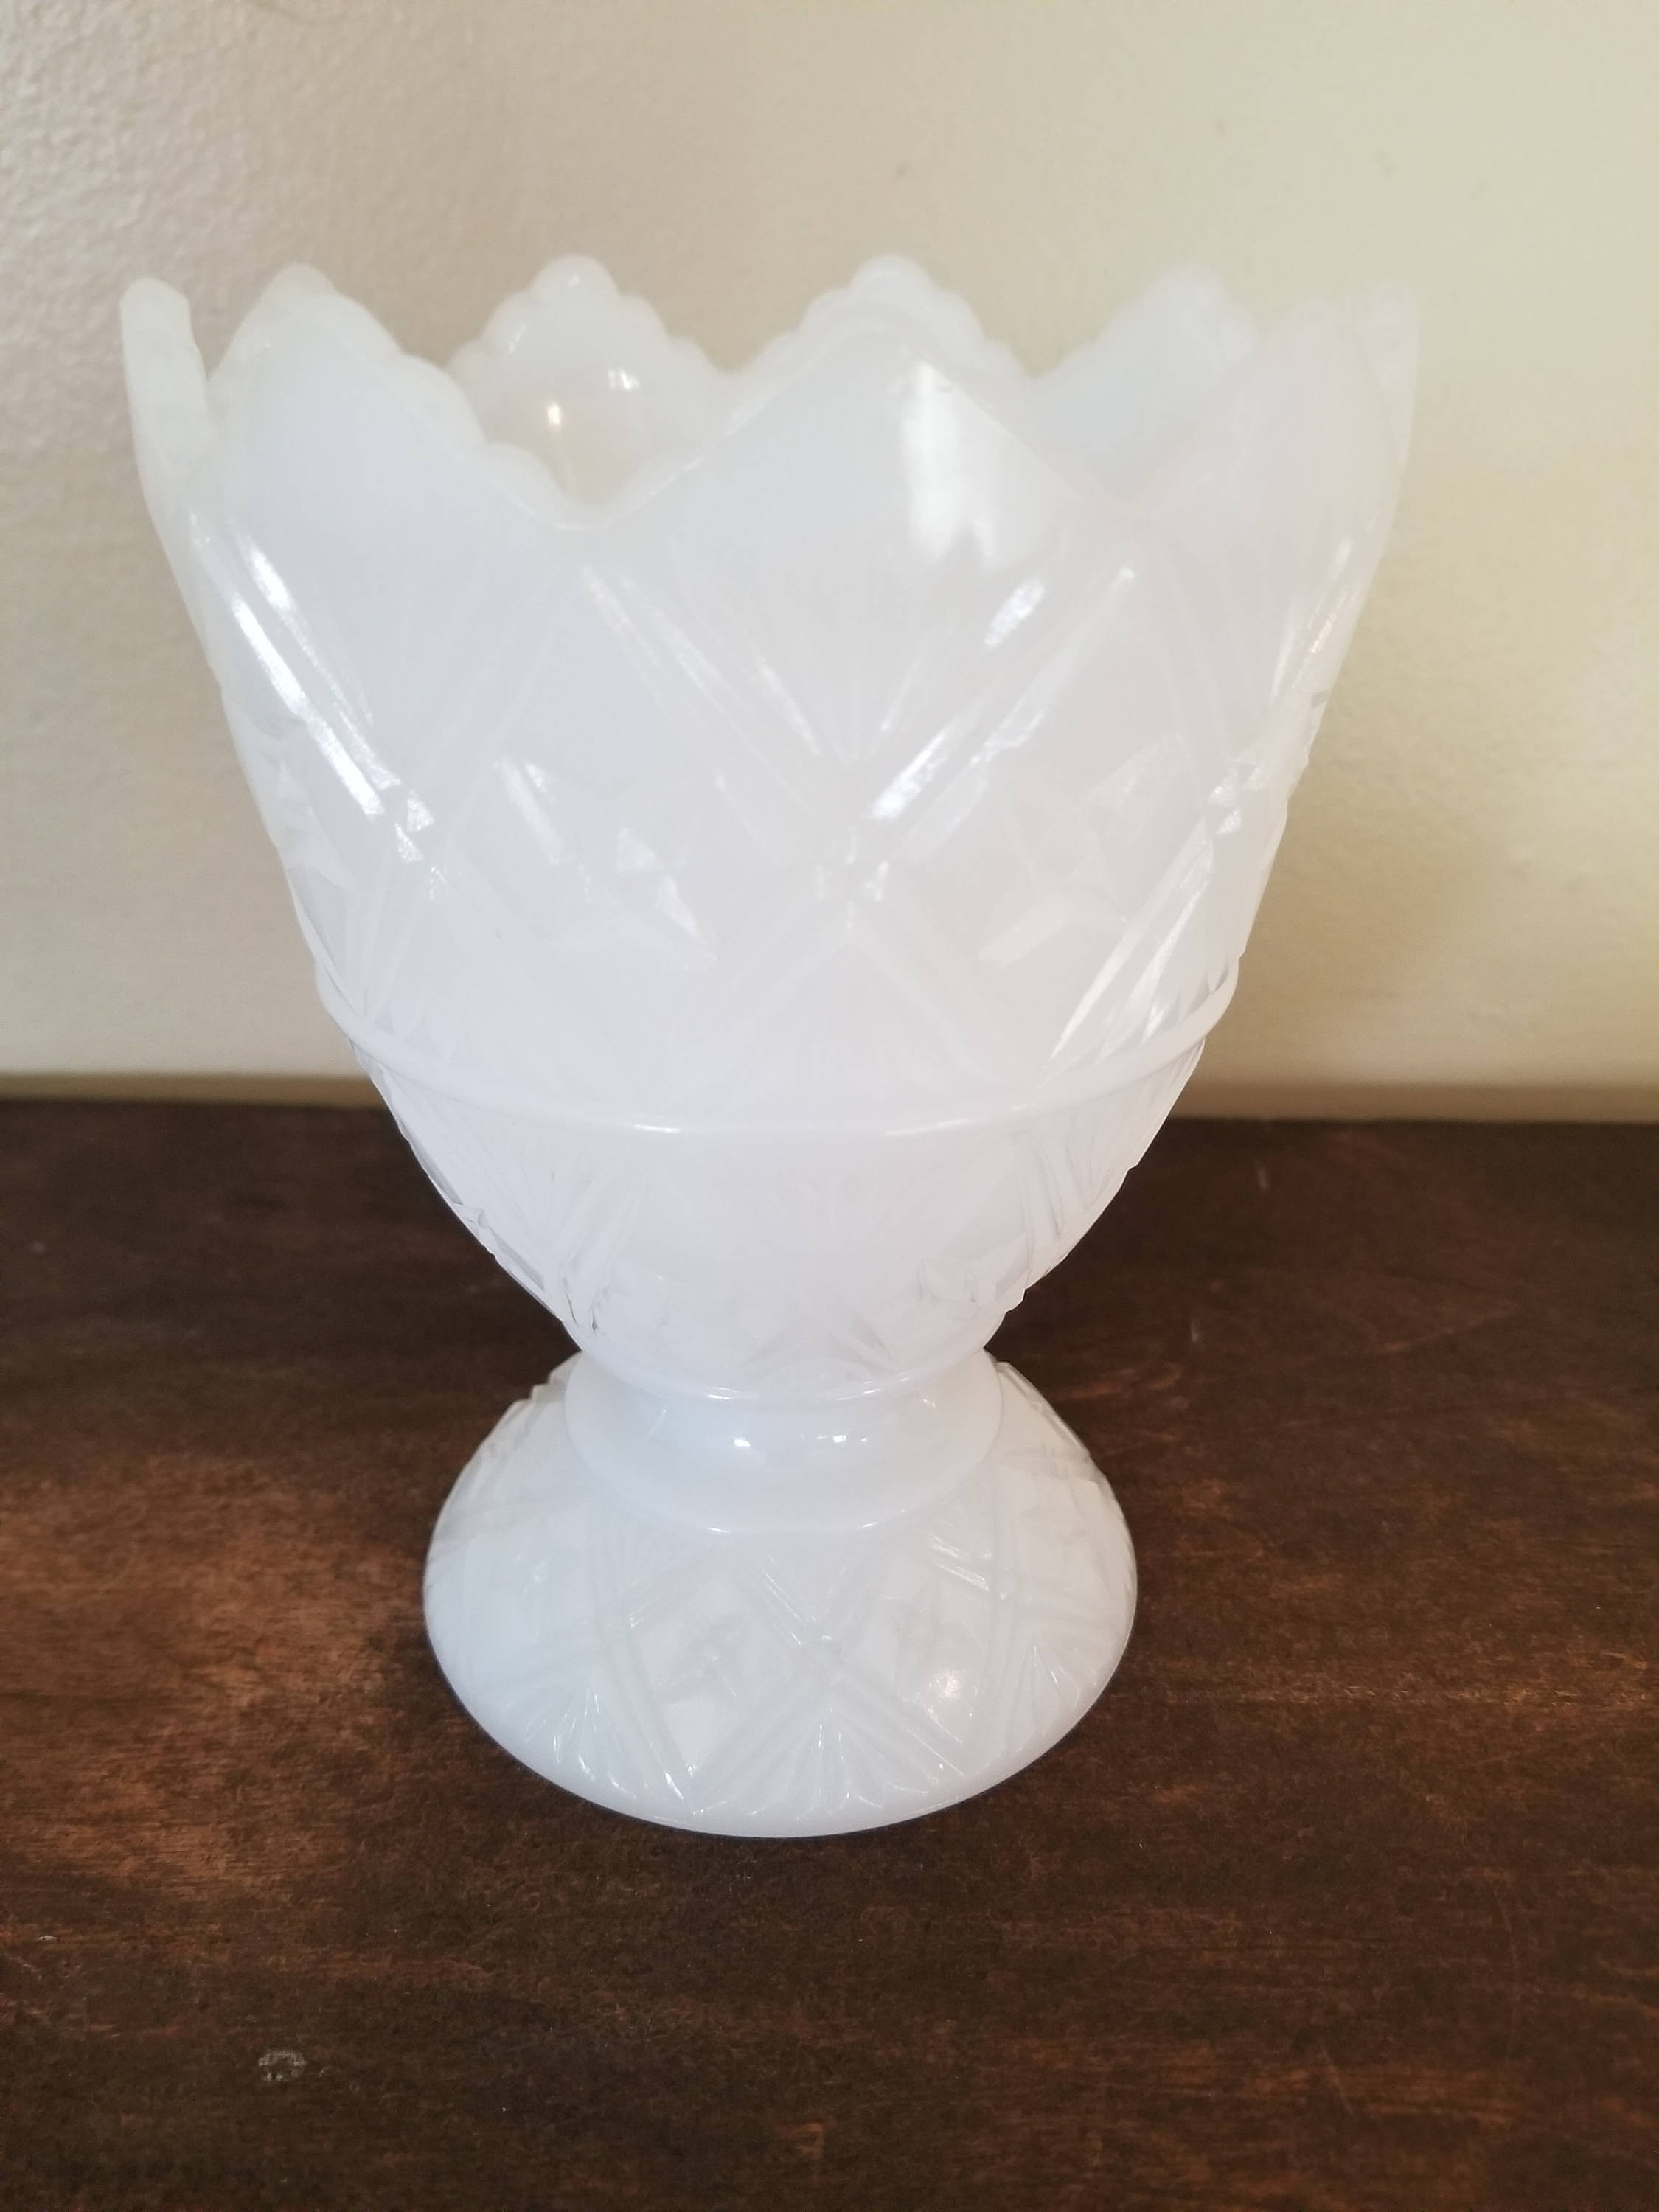 westmoreland milk glass vase of vintage milk glass e o brody embossed footed compote wedding intended for dzoom